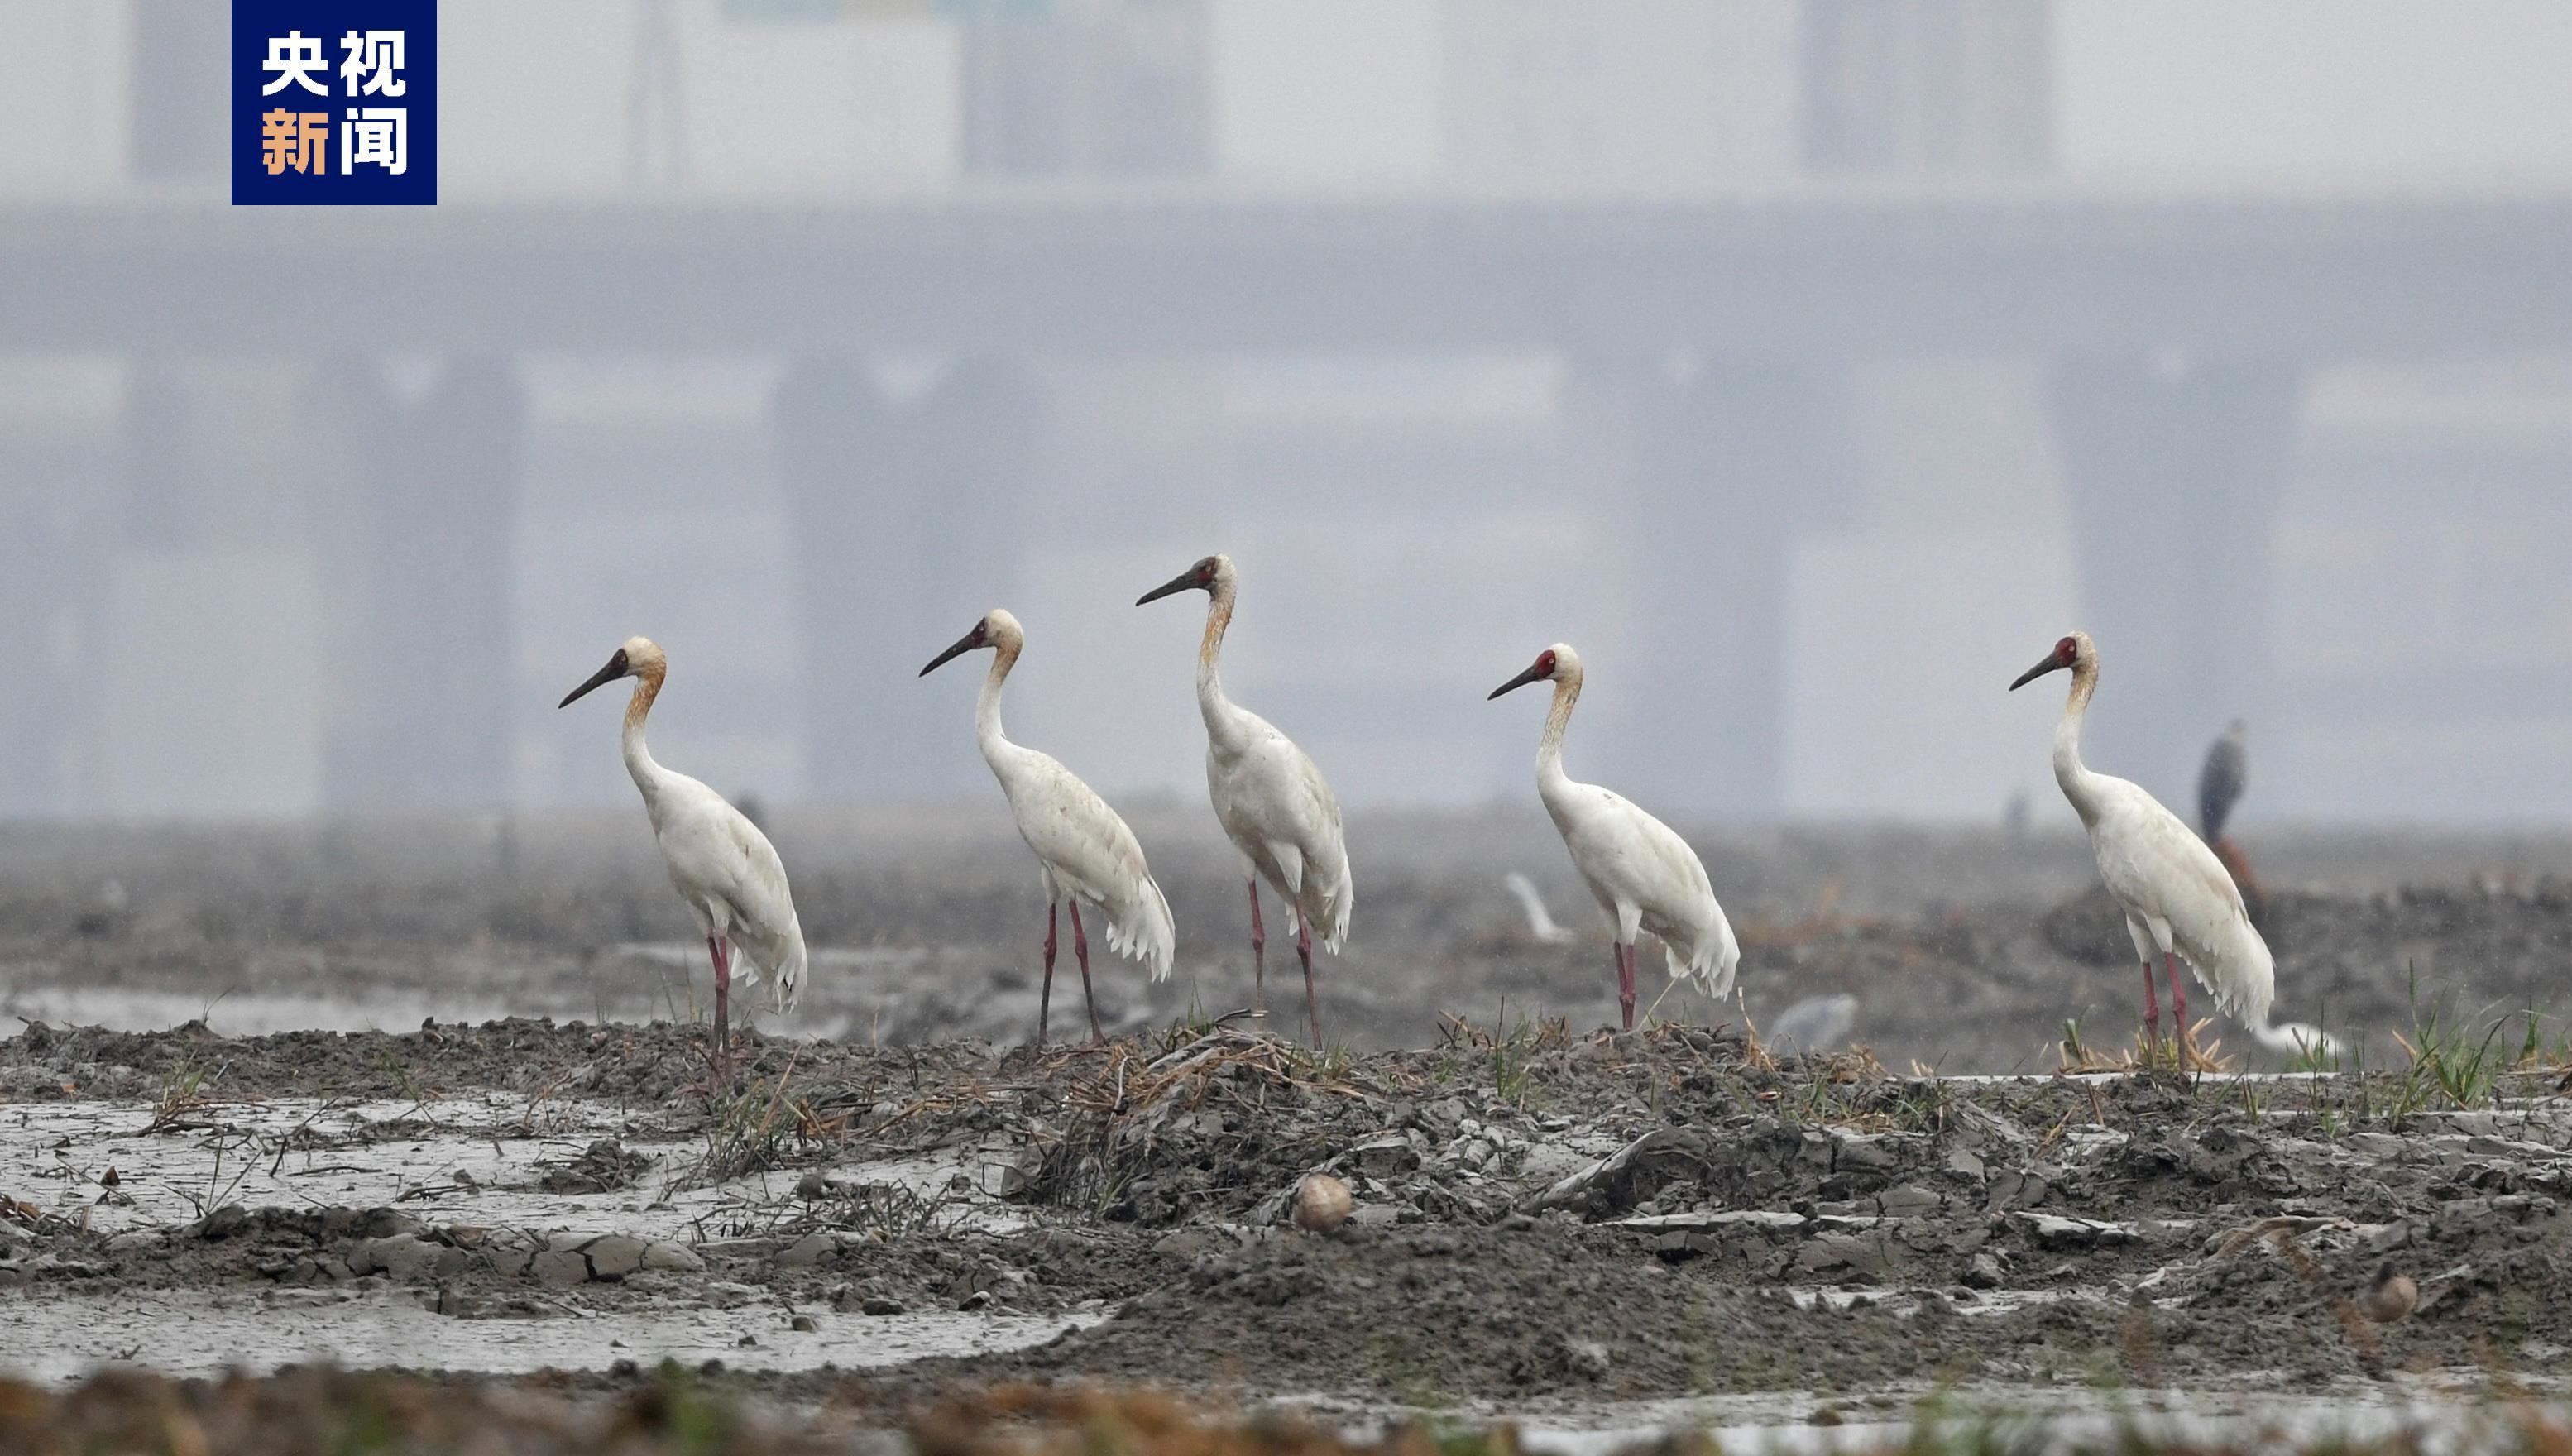 Endangered white cranes spotted in SE China’s Fujian